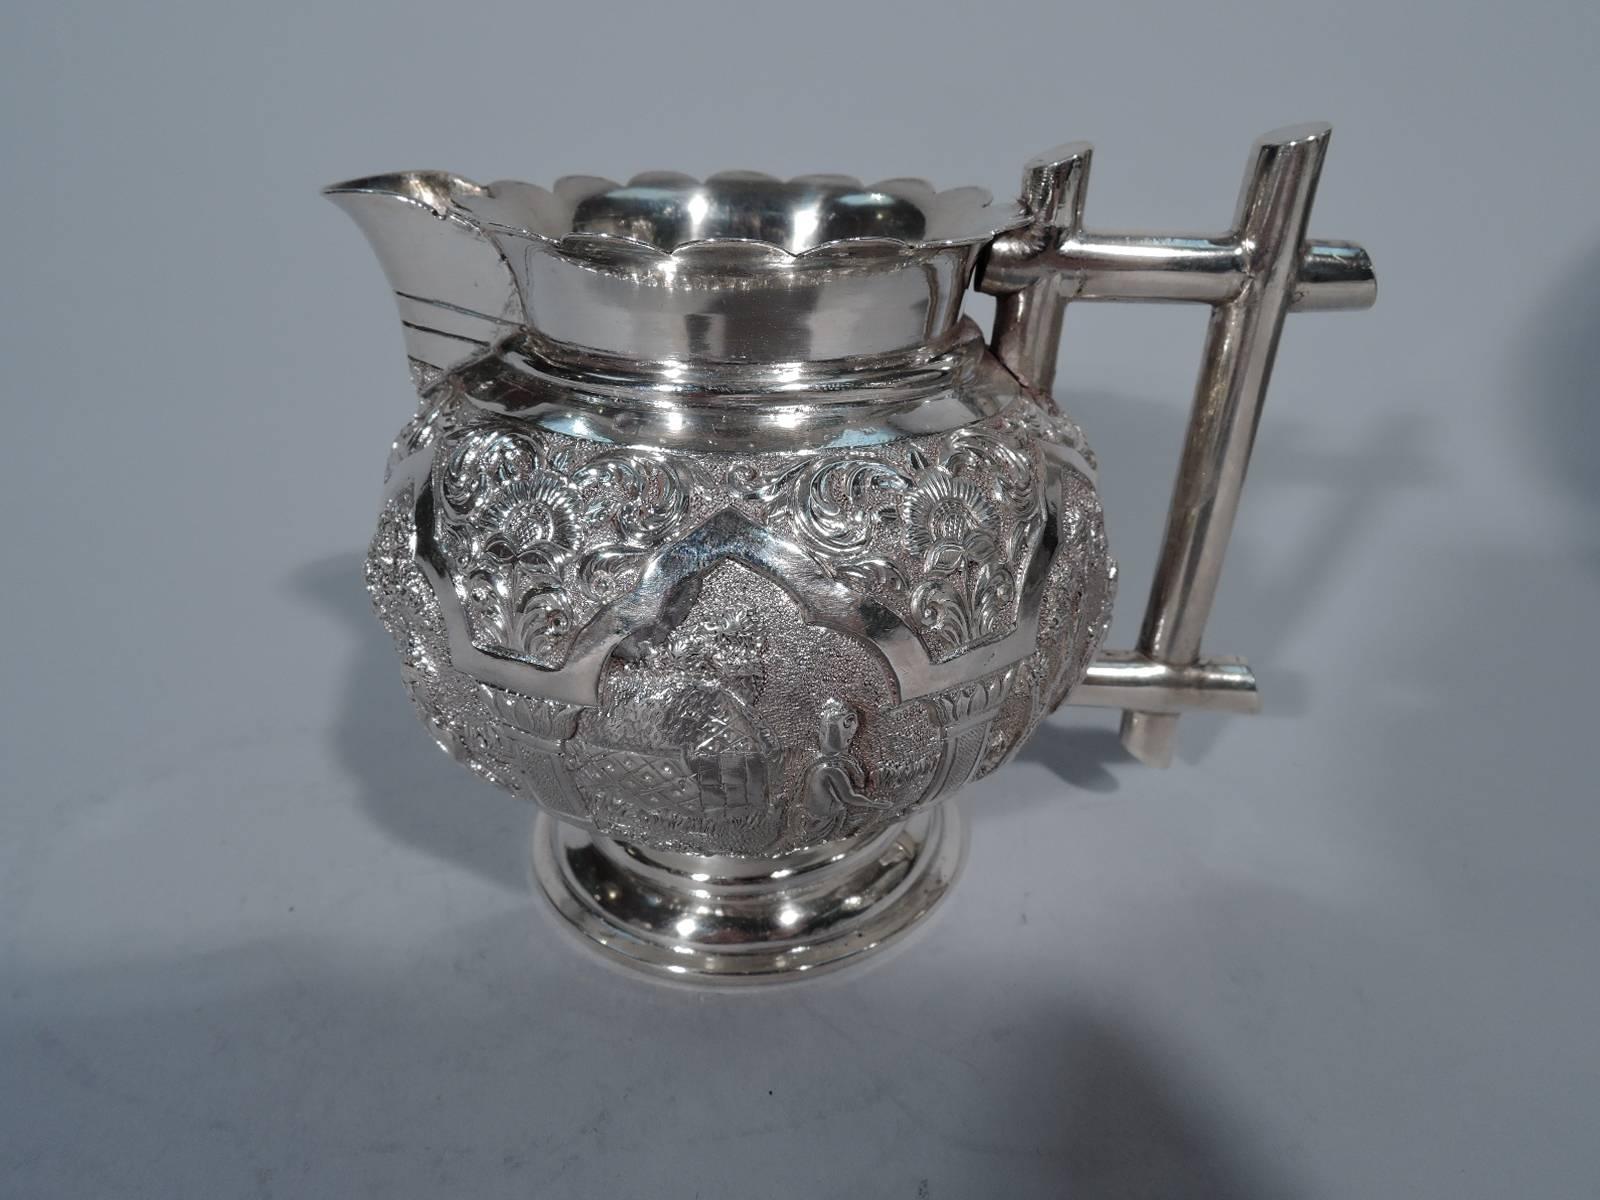 19th Century Colonial Indian Silver Tea Set with Exotic Scenes